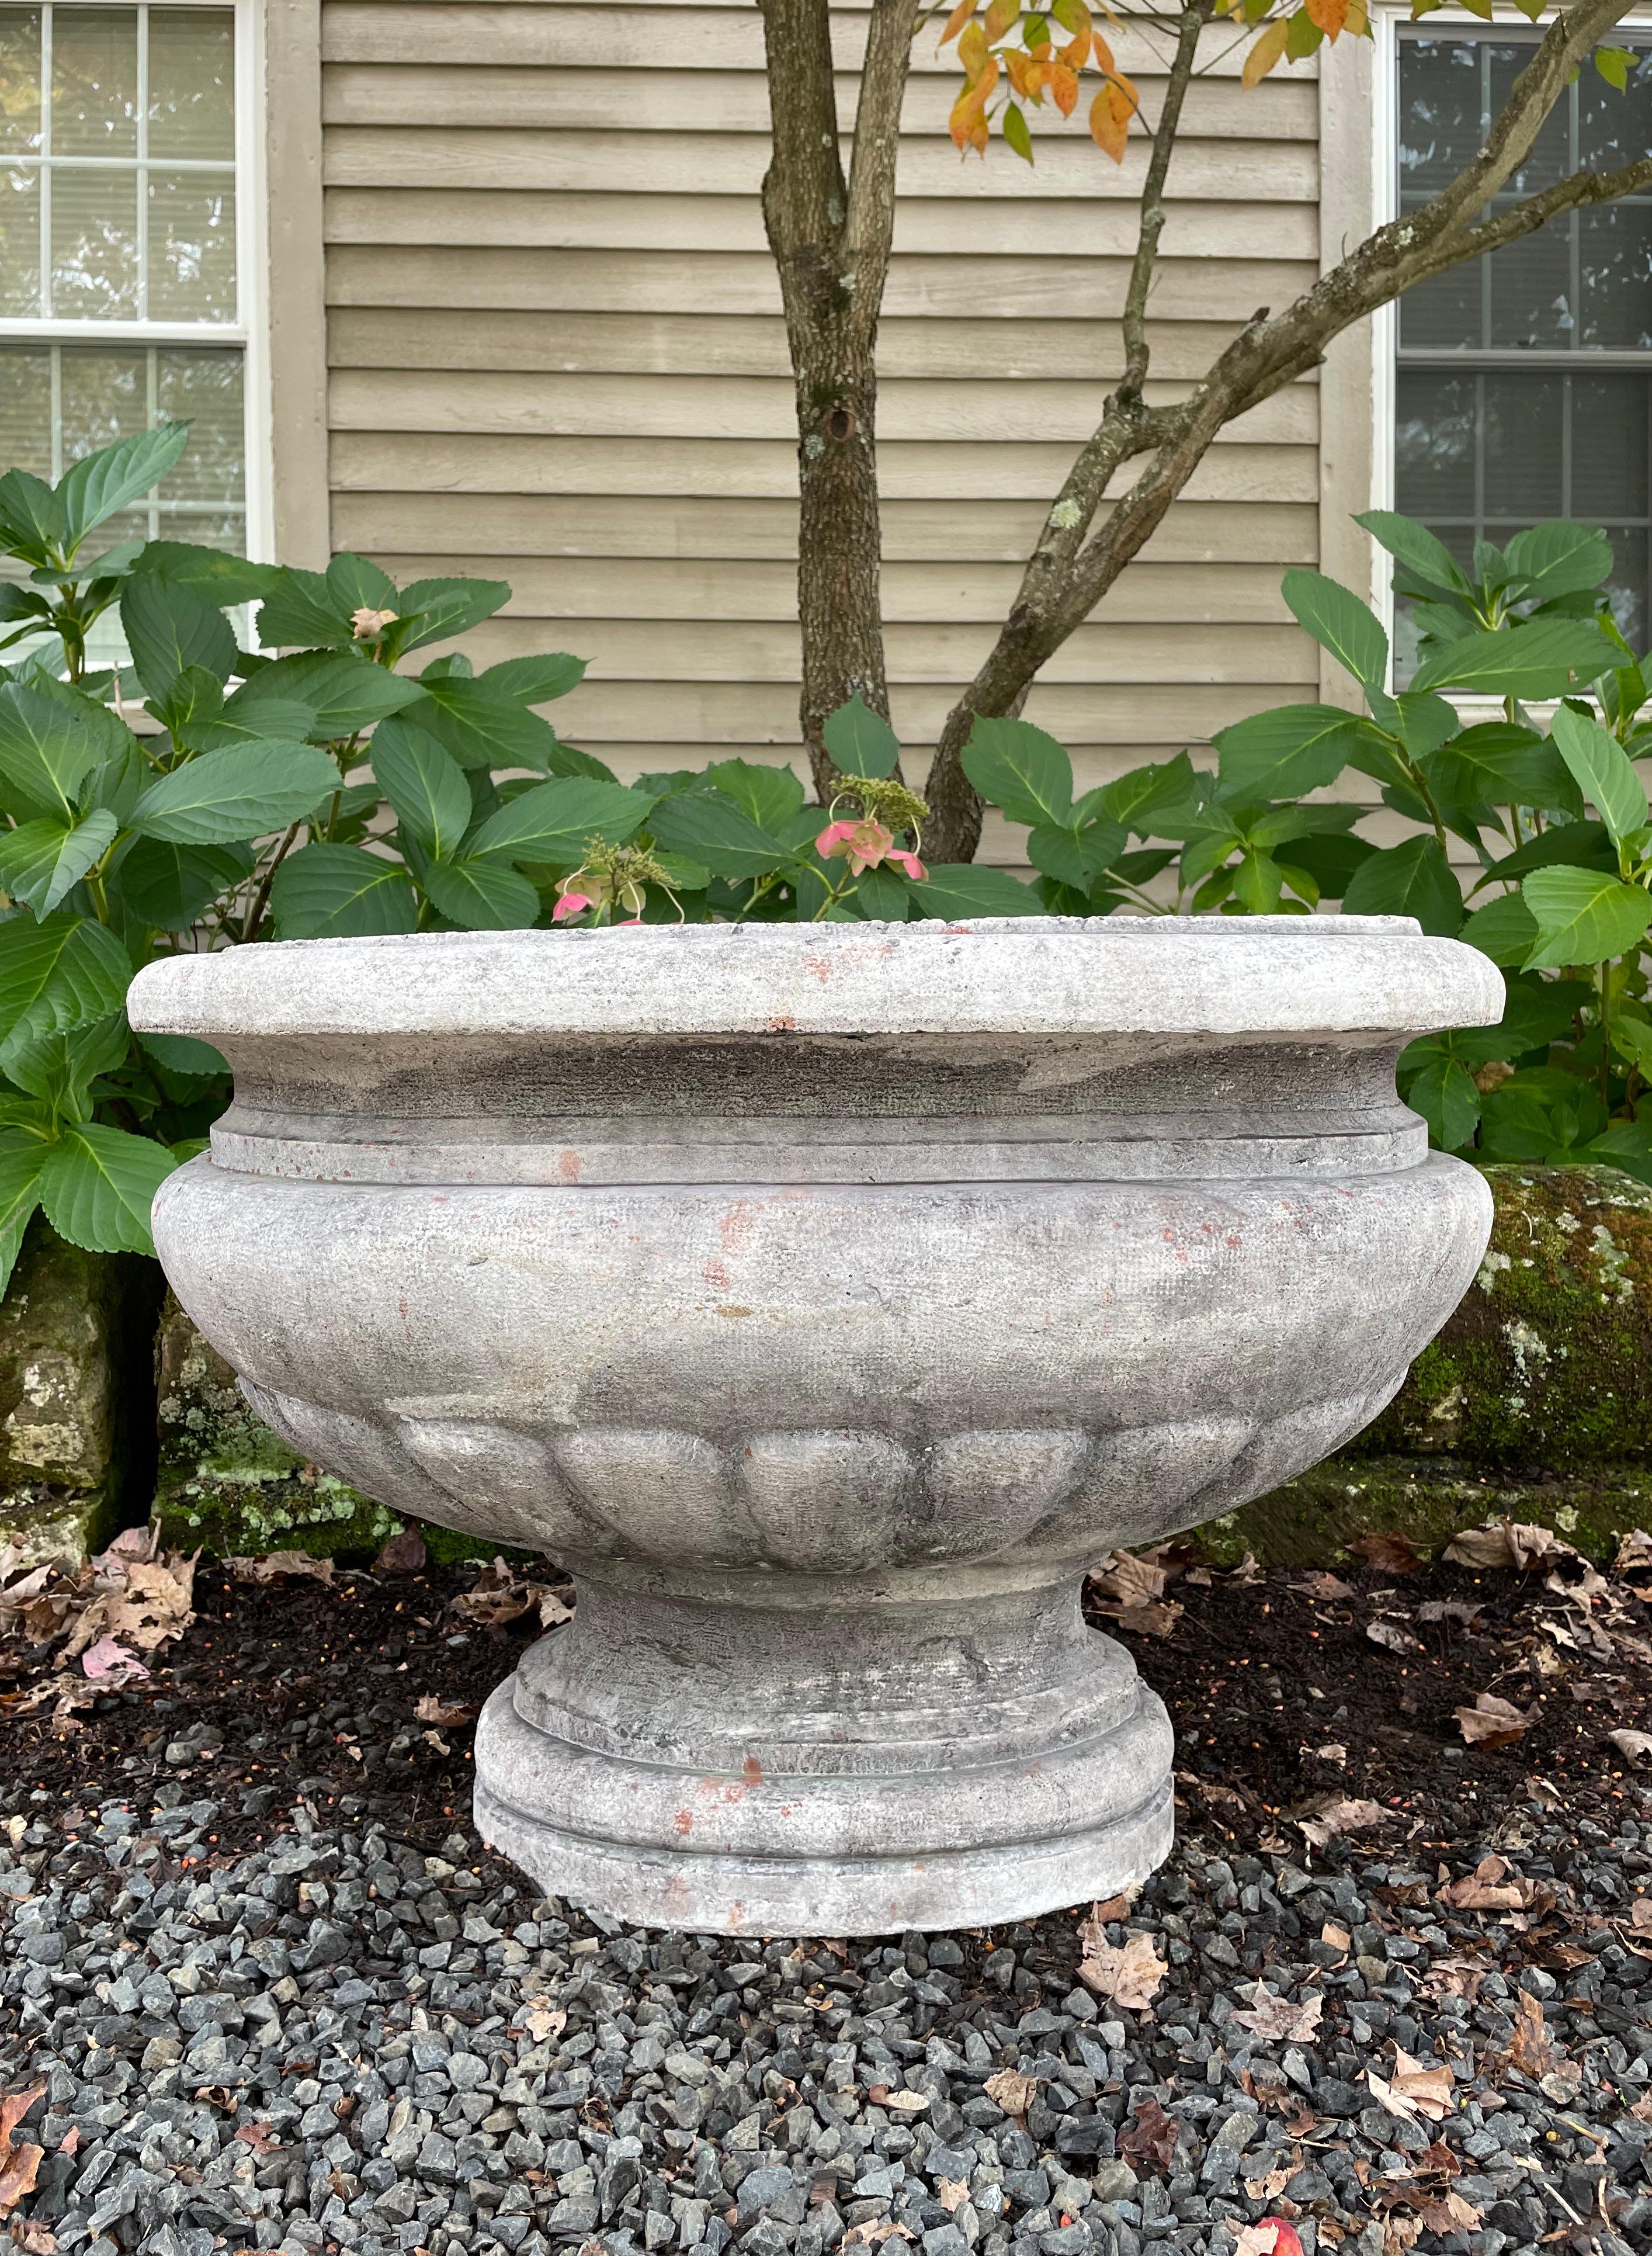 Hand-carved from Pierre de Bourgogne (Burgundy Stone) that is extremely hard, durable and very heavy, this fine and large Neoclassical oval jardiniere dates to around 1790 and is in gorgeous condition. Elegant in form, it features a semi-lobed body